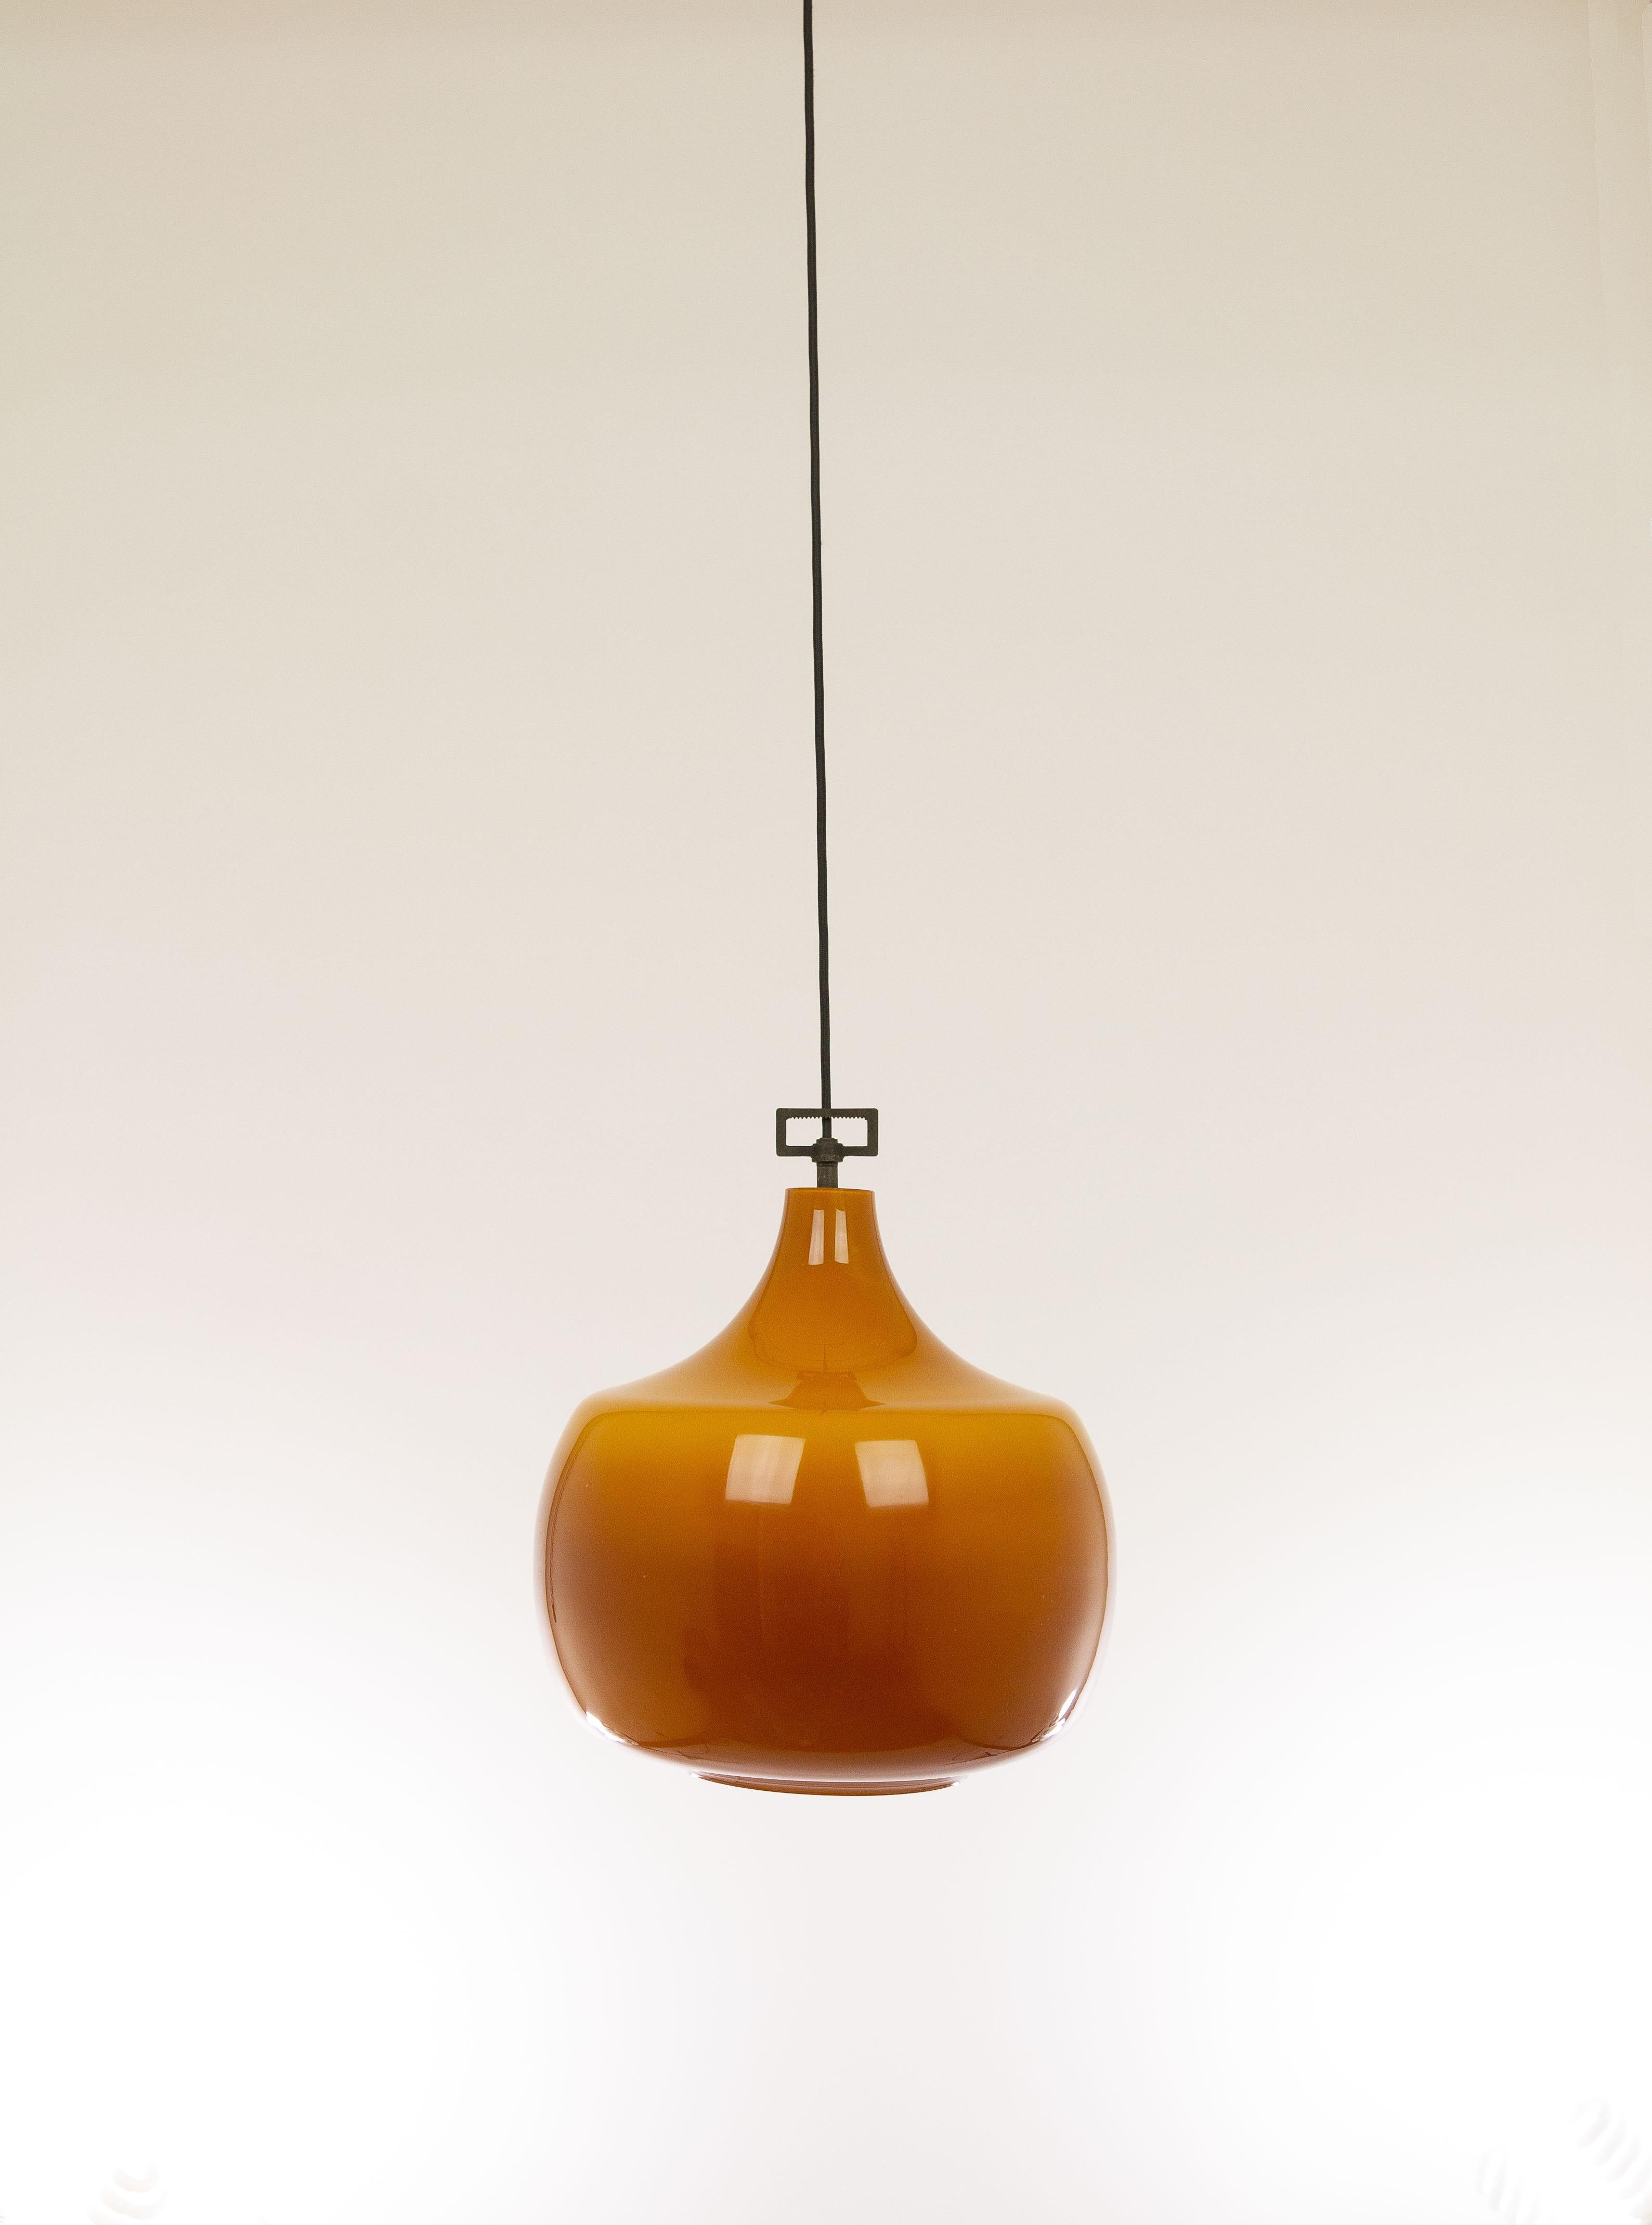 Hand blown amber glass pendant manufactured by Murano glass specialist Venini.

The piece has been rewired with 2 m high-end black fabric cord—for safety and beauty.